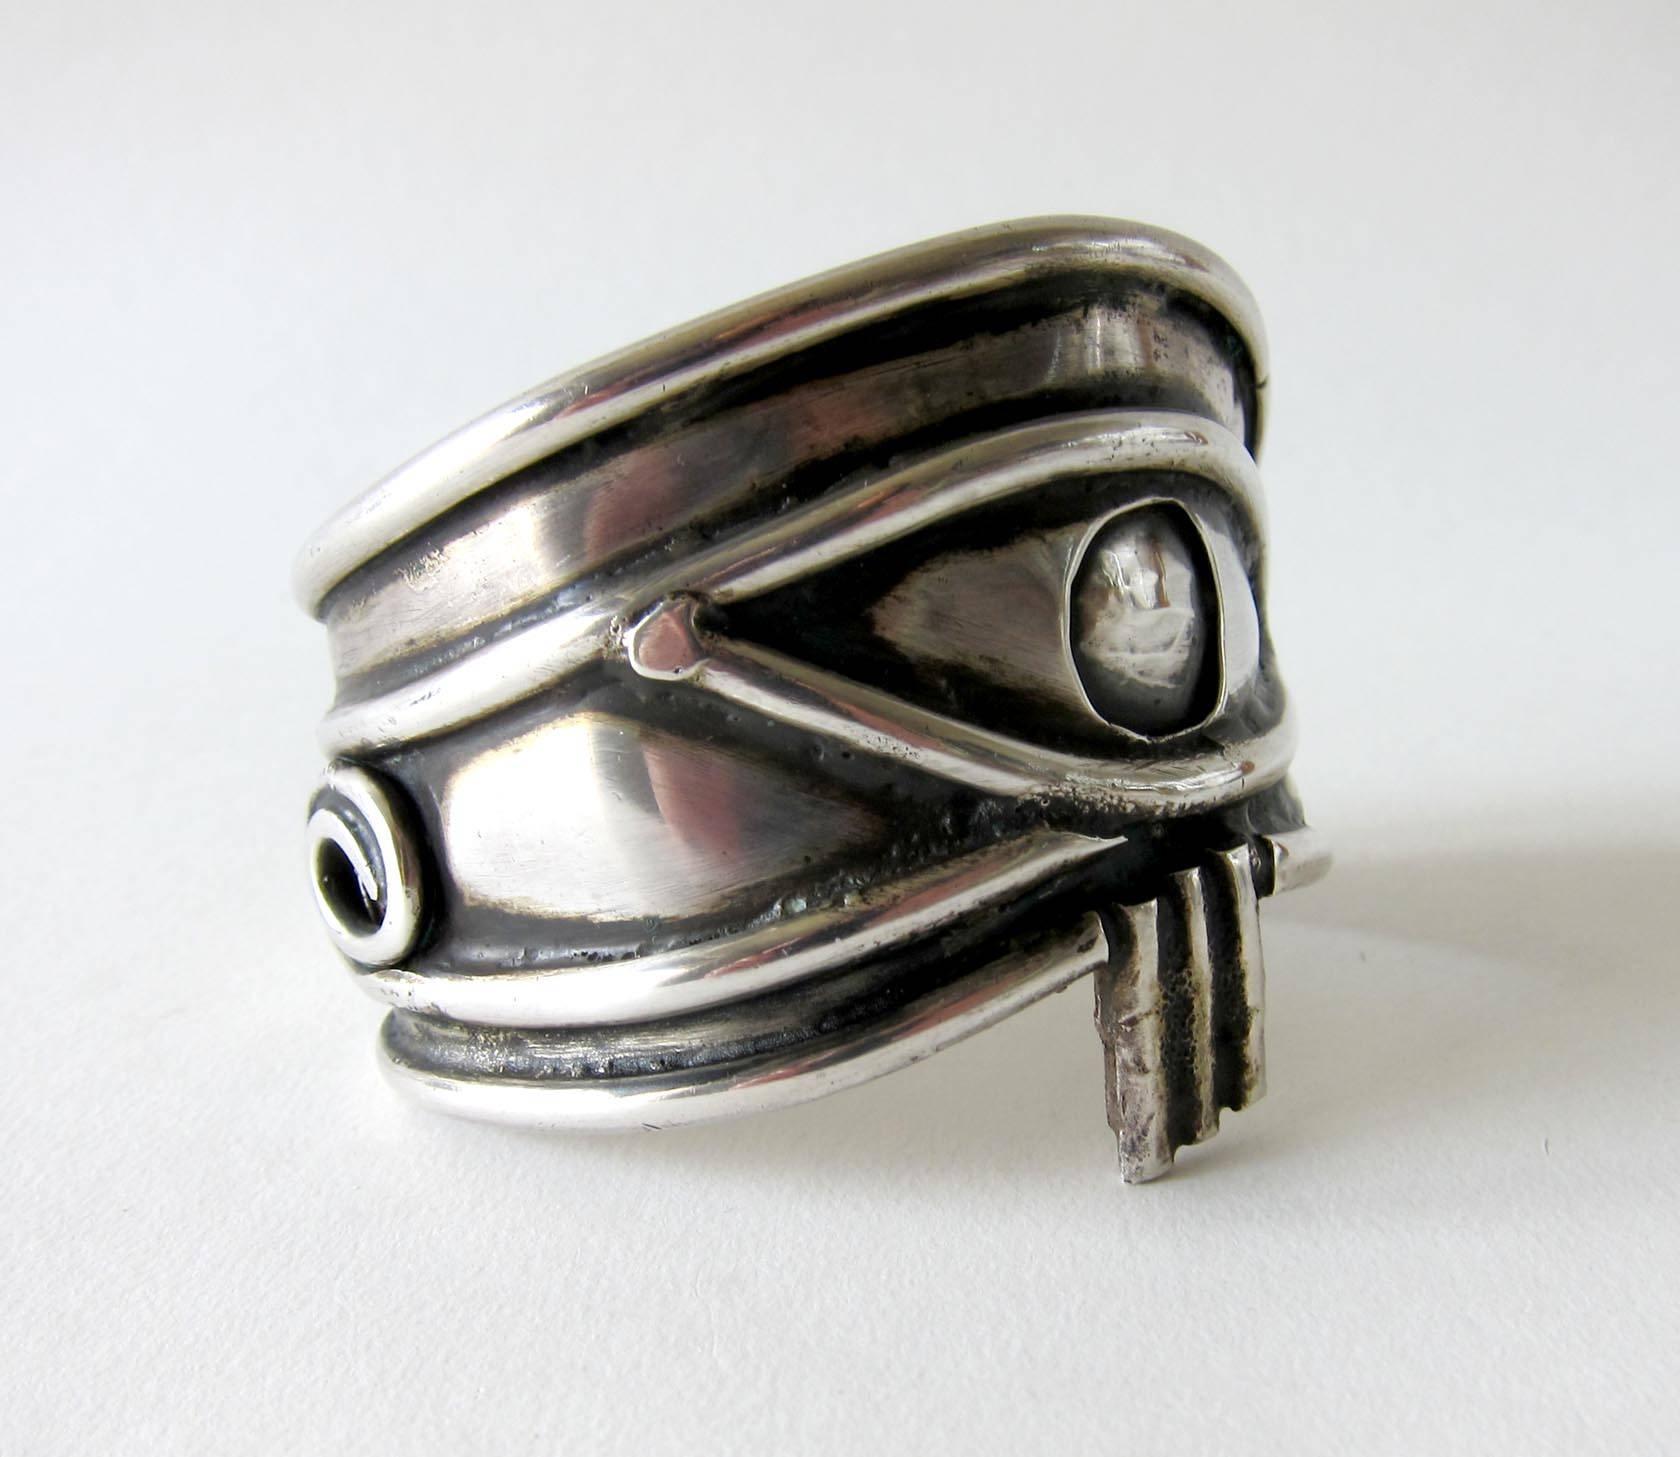 Handmade, sterling silver Eye of Ra bracelet circa 1970's.  Bracelet depicts the eye of the sun God, Ra and represents clairvoyance, omniscience, and a gateway into the soul.  It measures 7.5